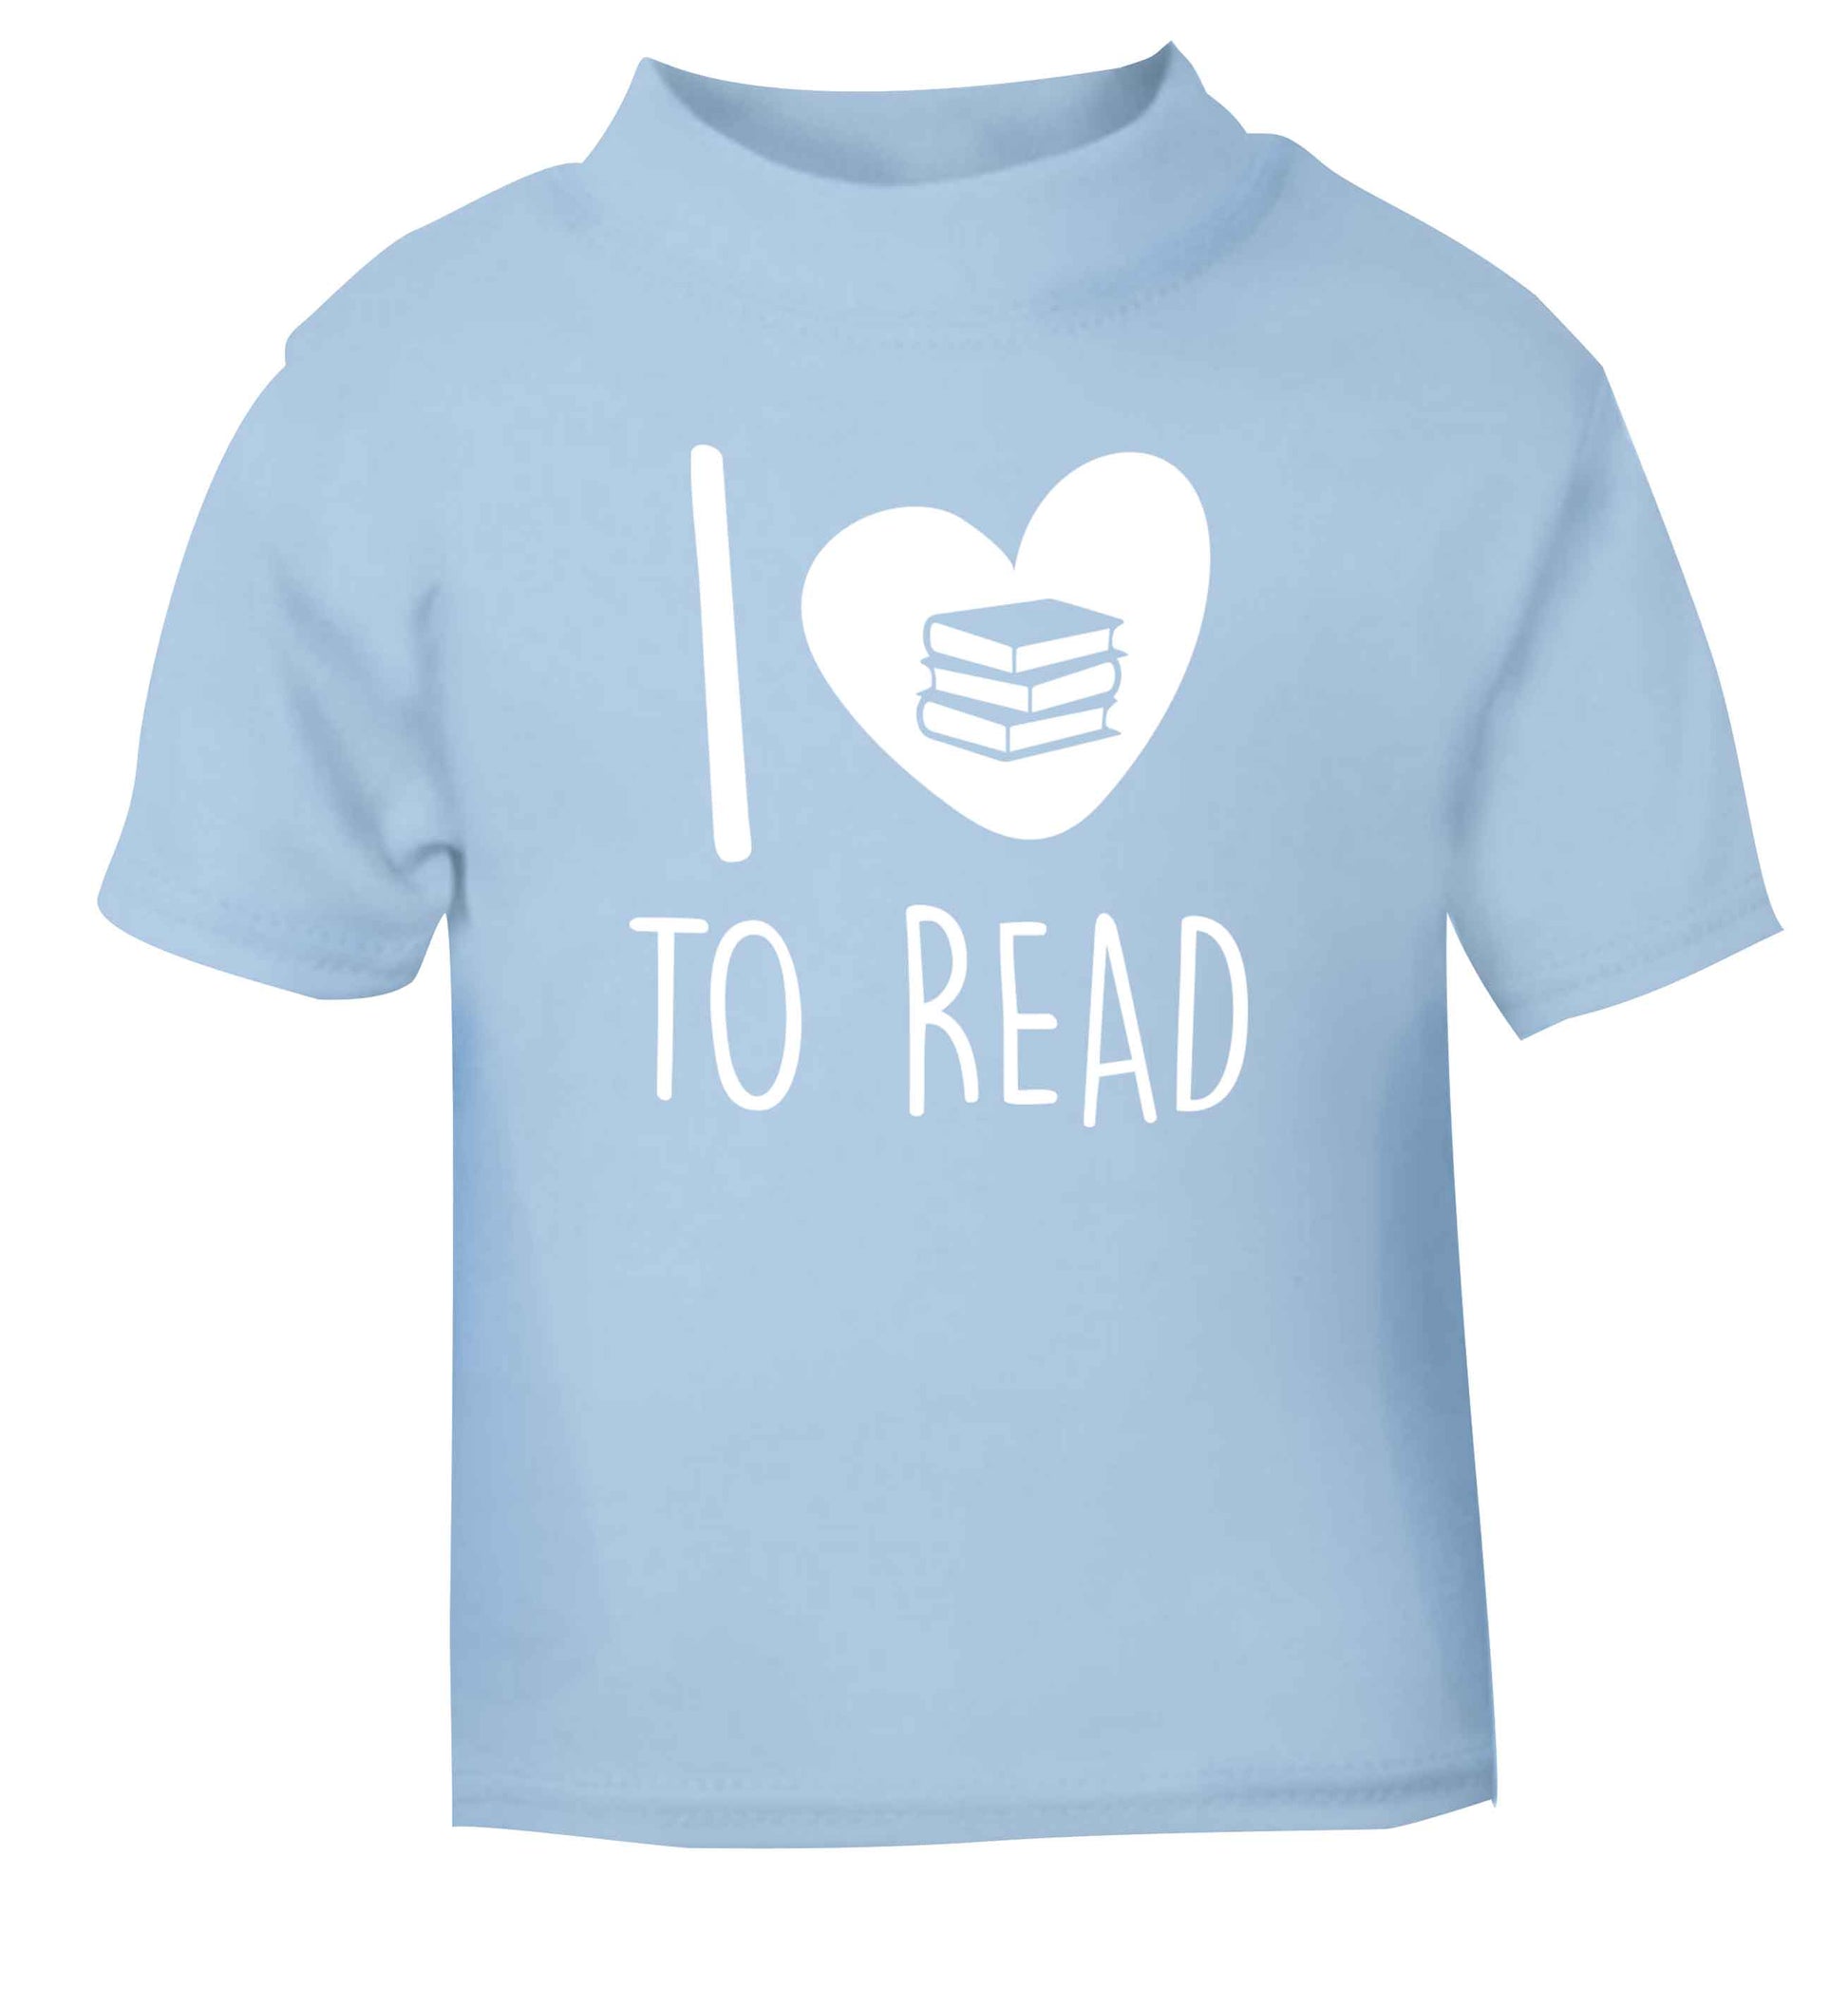 I love to read light blue Baby Toddler Tshirt 2 Years